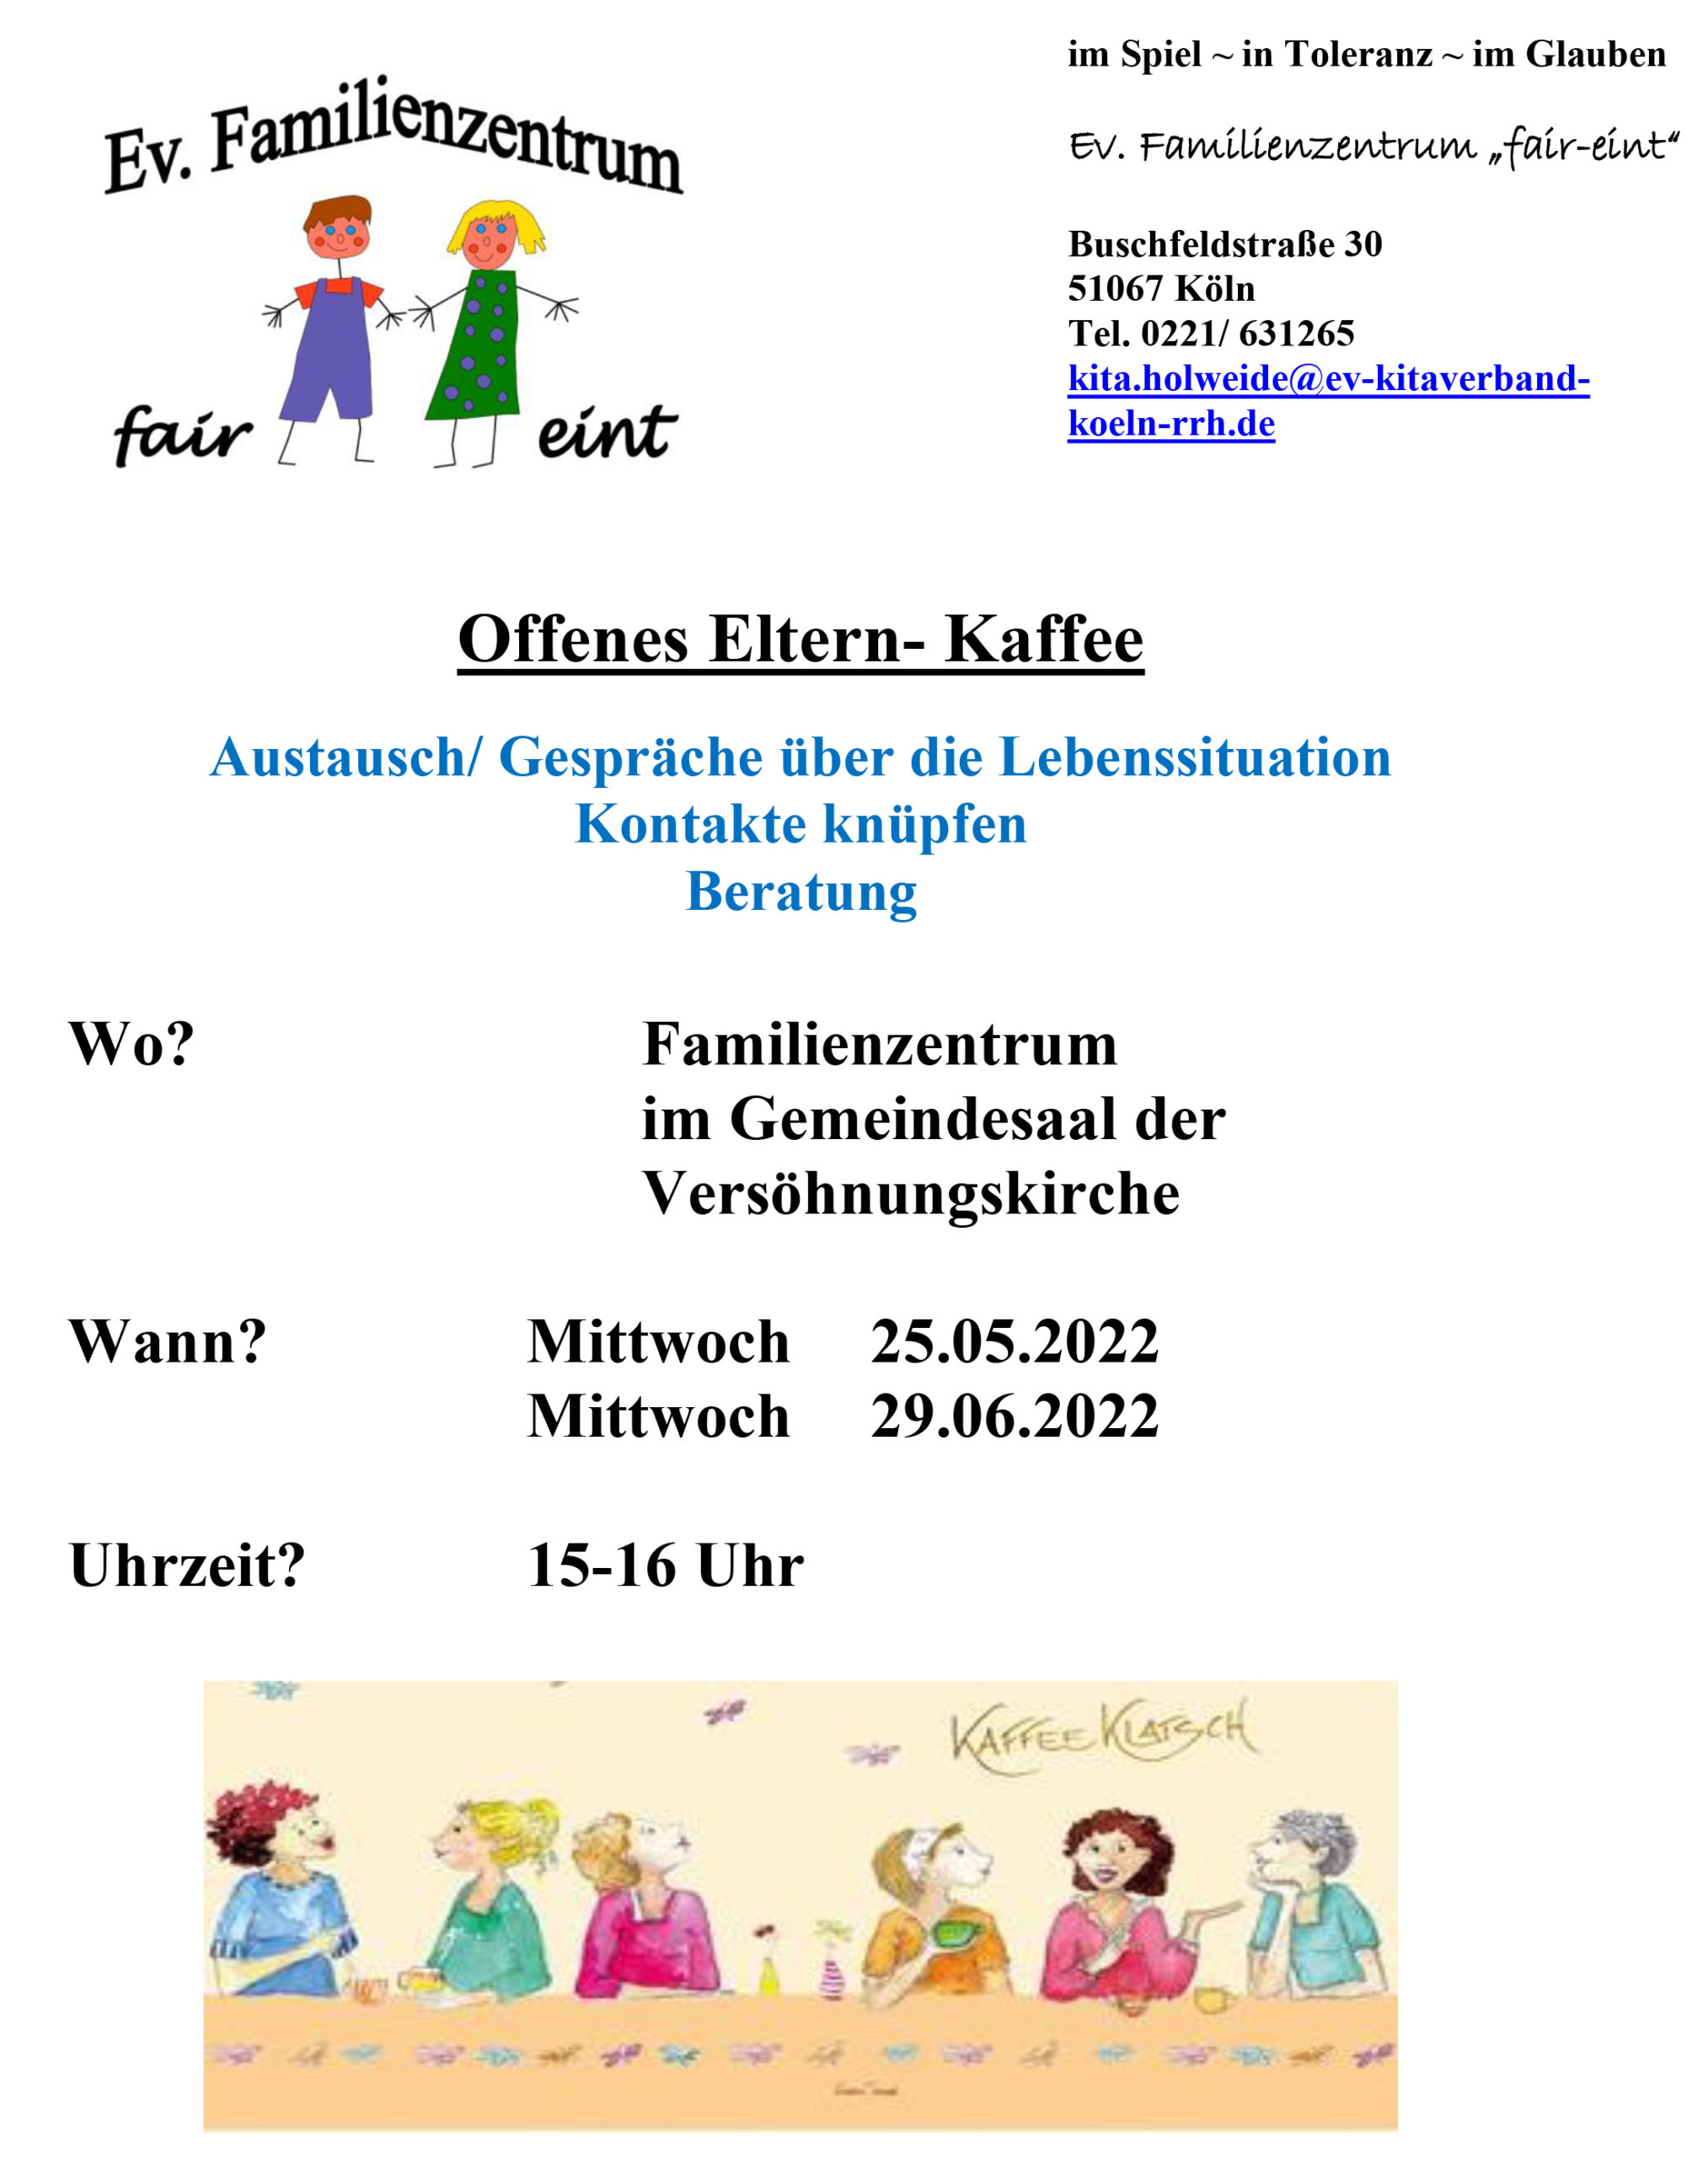 You are currently viewing Offenes Eltern – Kaffee im Ev. Familienzentrum am 29.06.2022